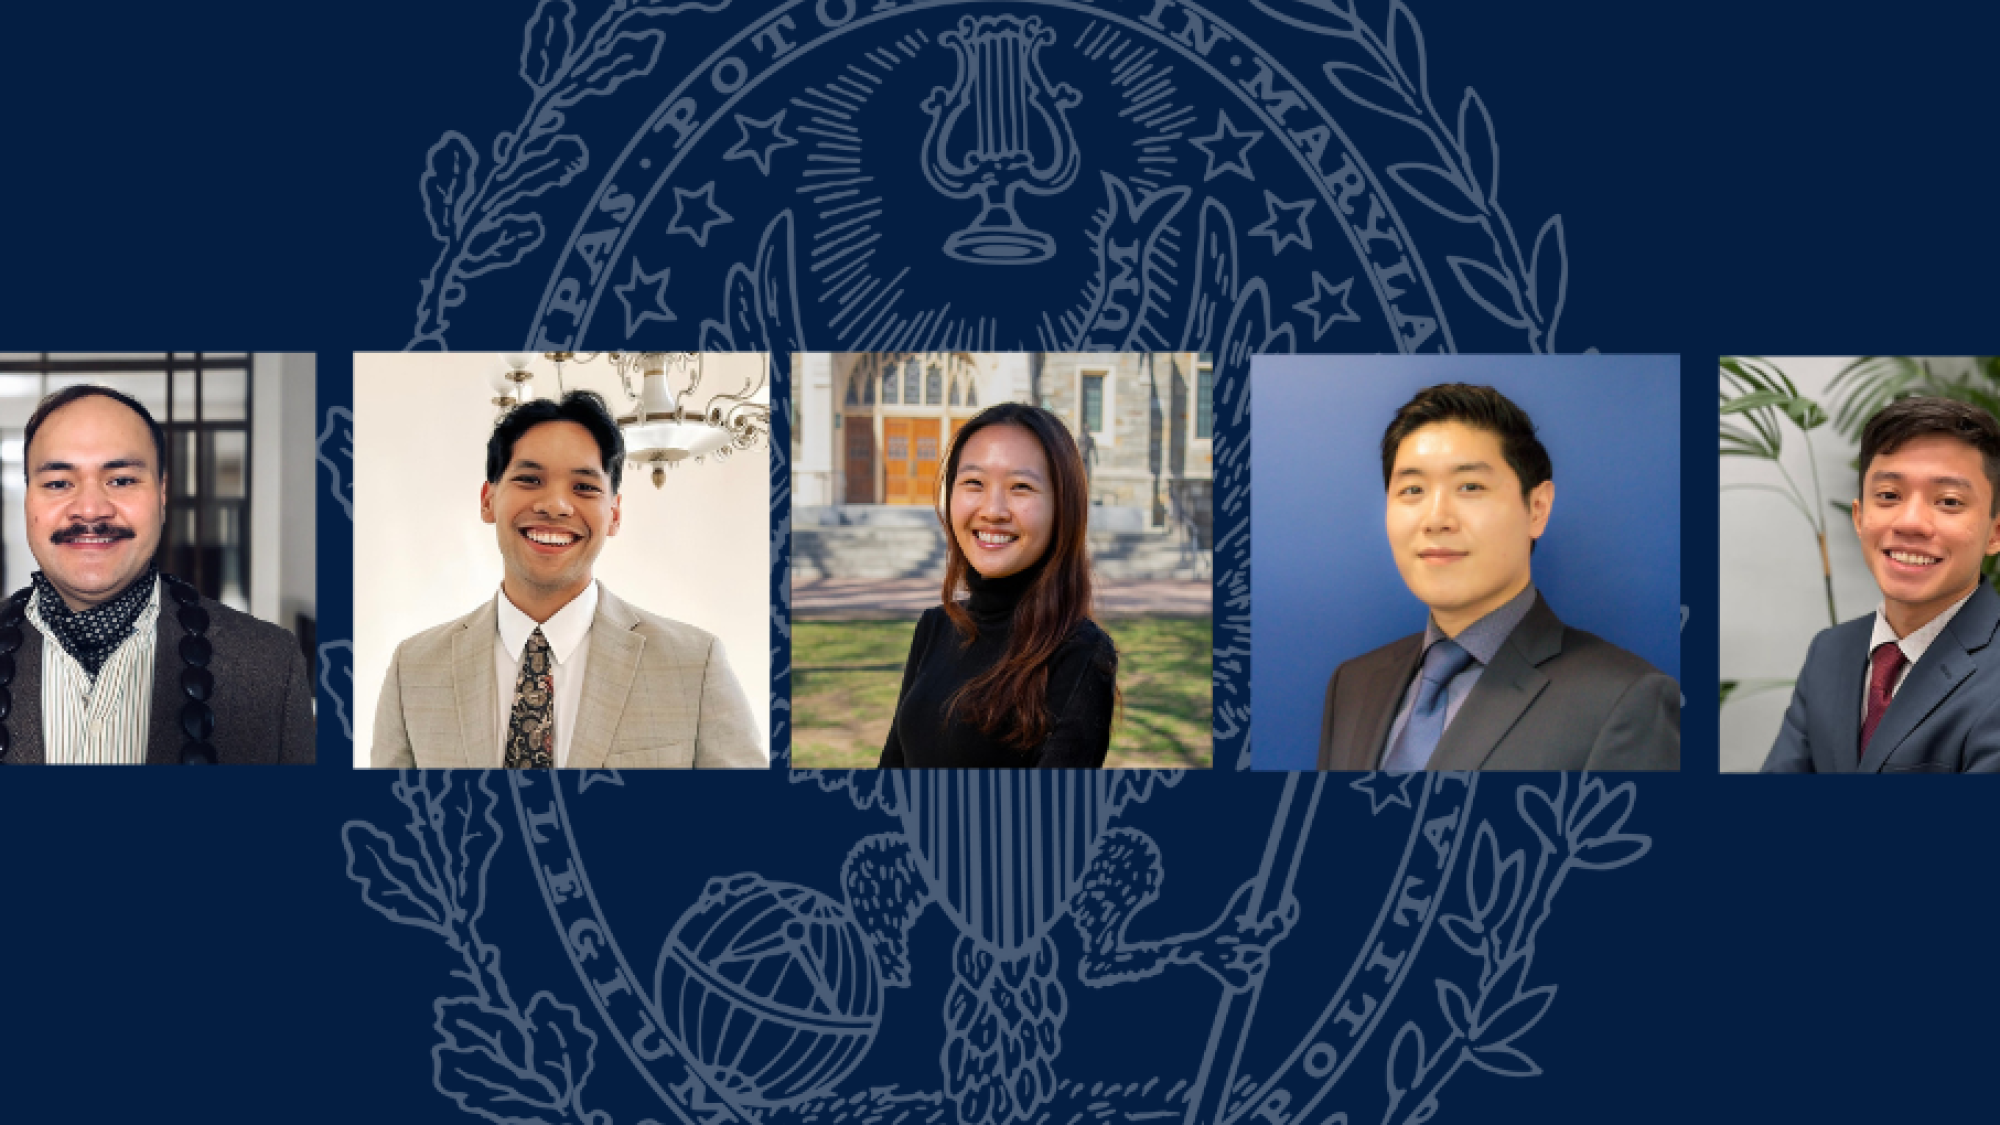 Graphic with blue background, Georgetown University seal, and collage of five AAPI students photos